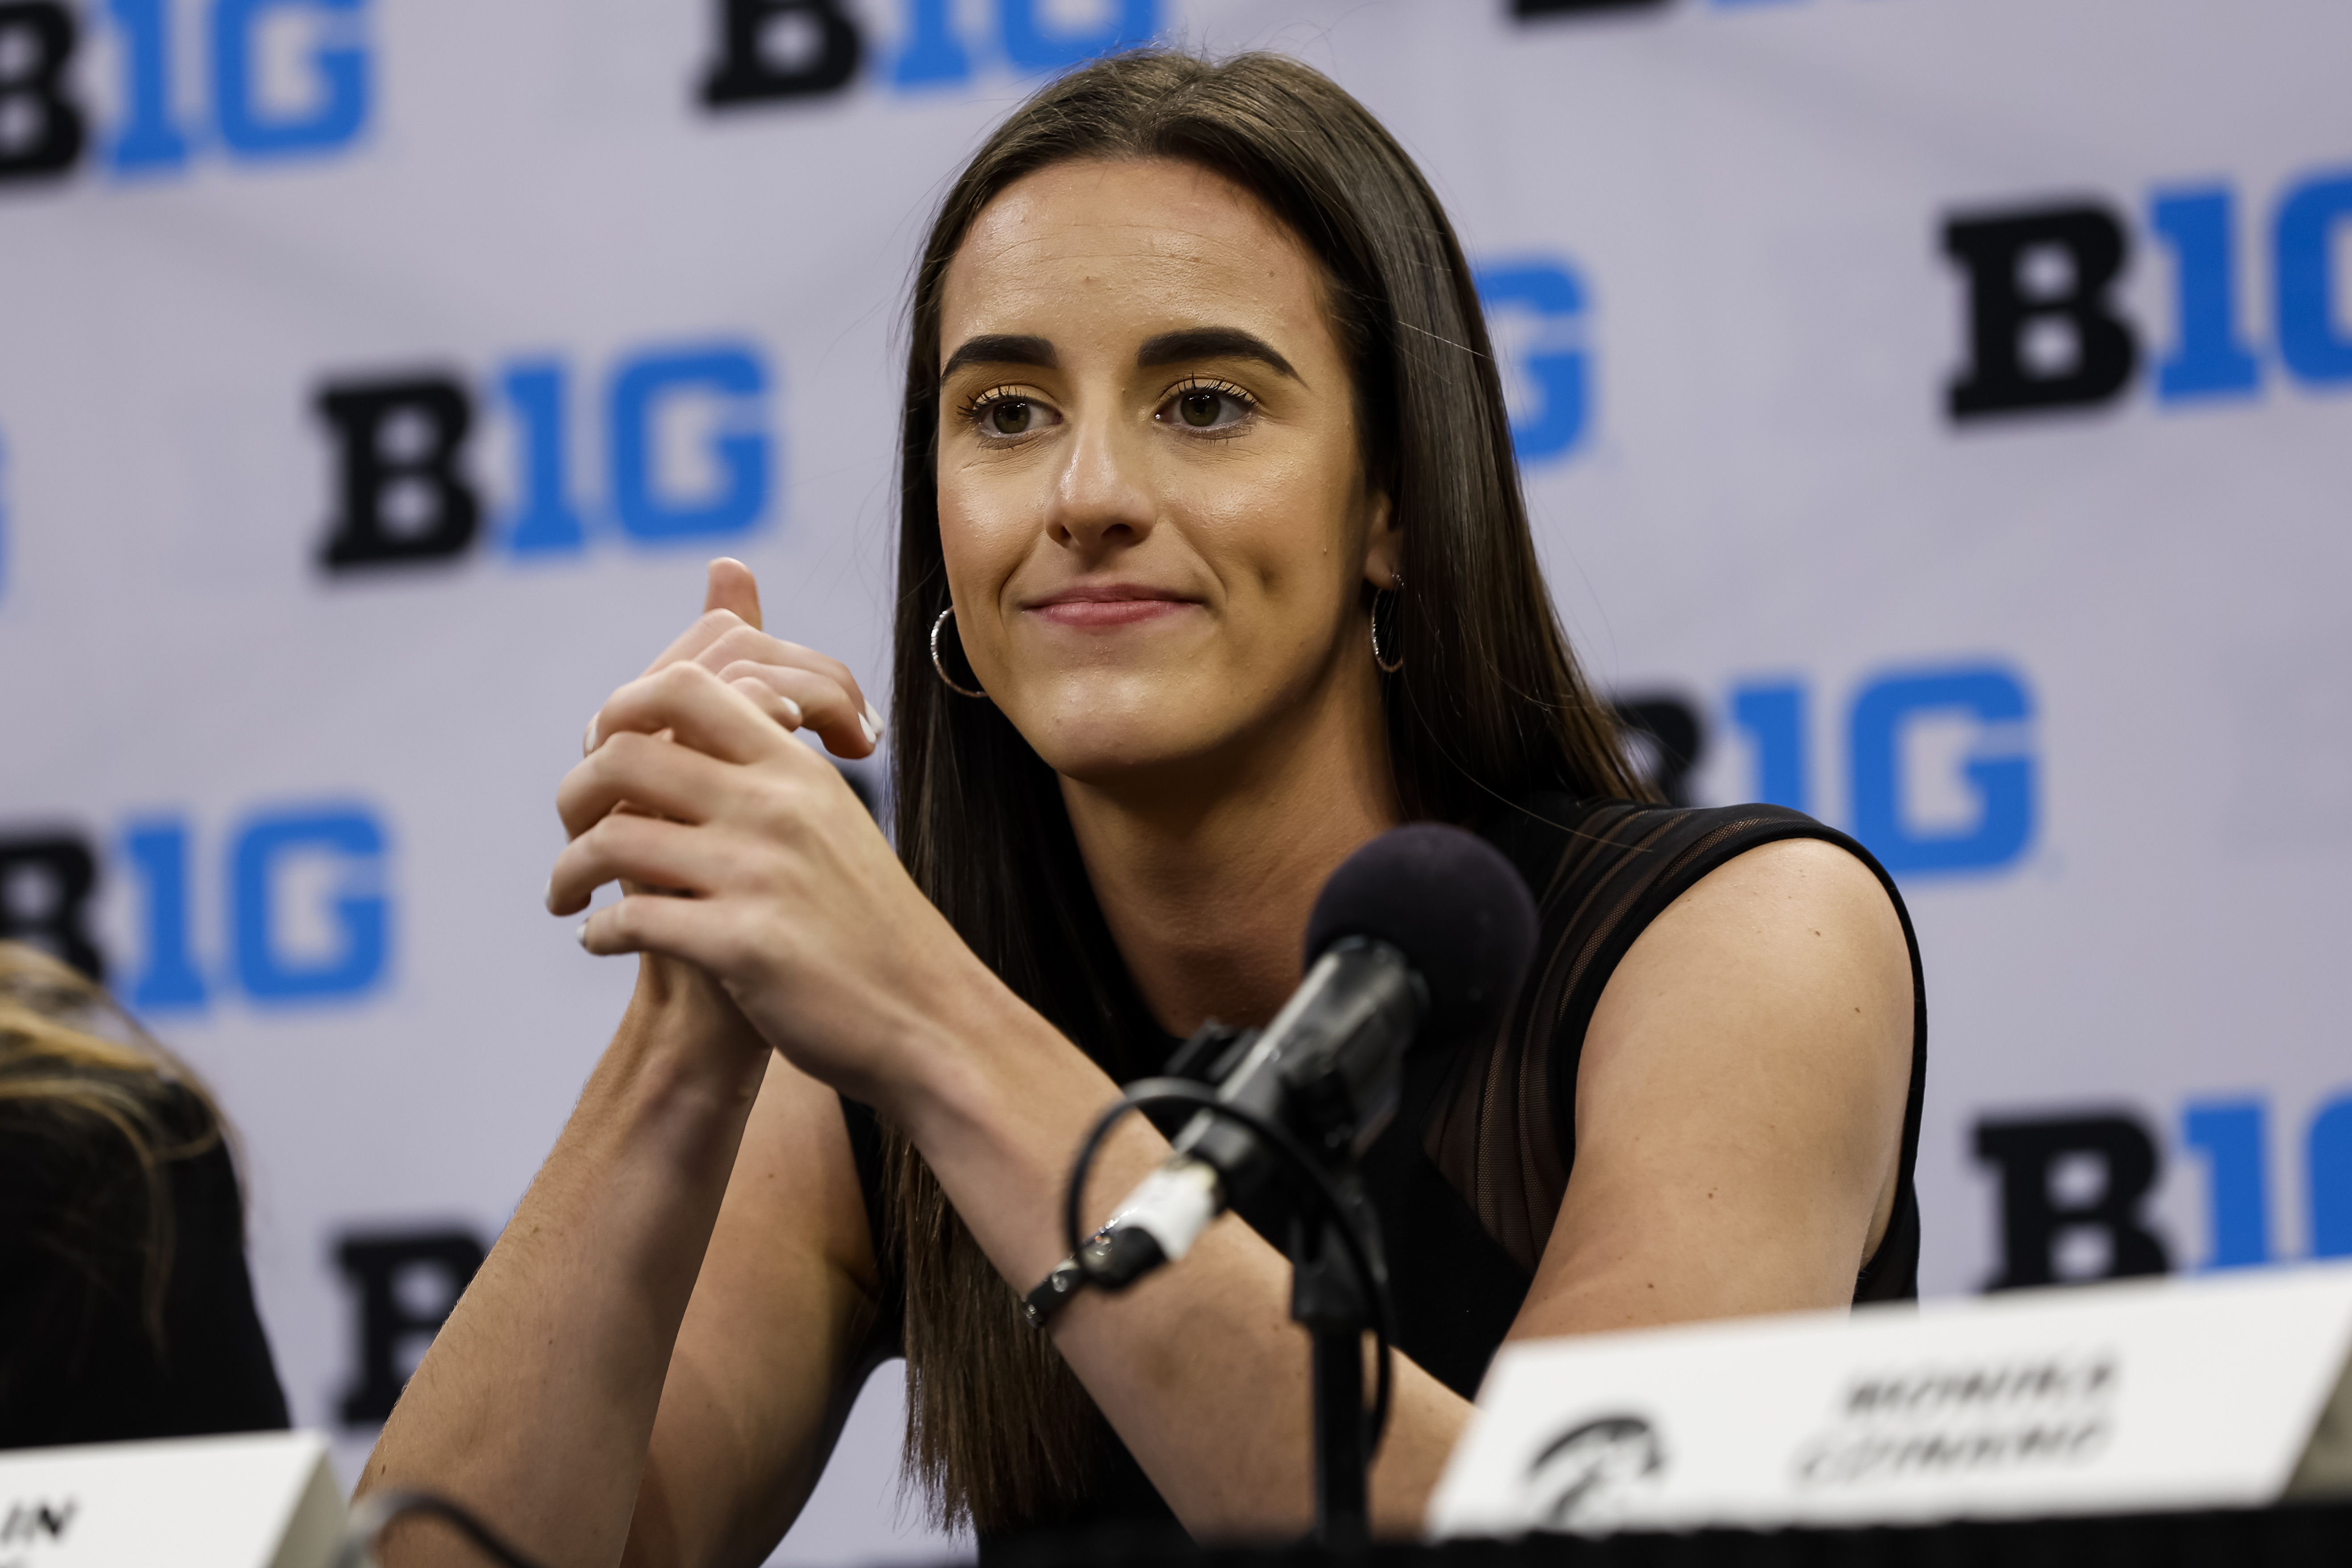 Caitlin Clark of the Iowa Hawkeyes speaks to media during Big Ten Media Days at Target Center in Minneapolis, Minnesota, on October 11, 2022. | Source: Getty Images